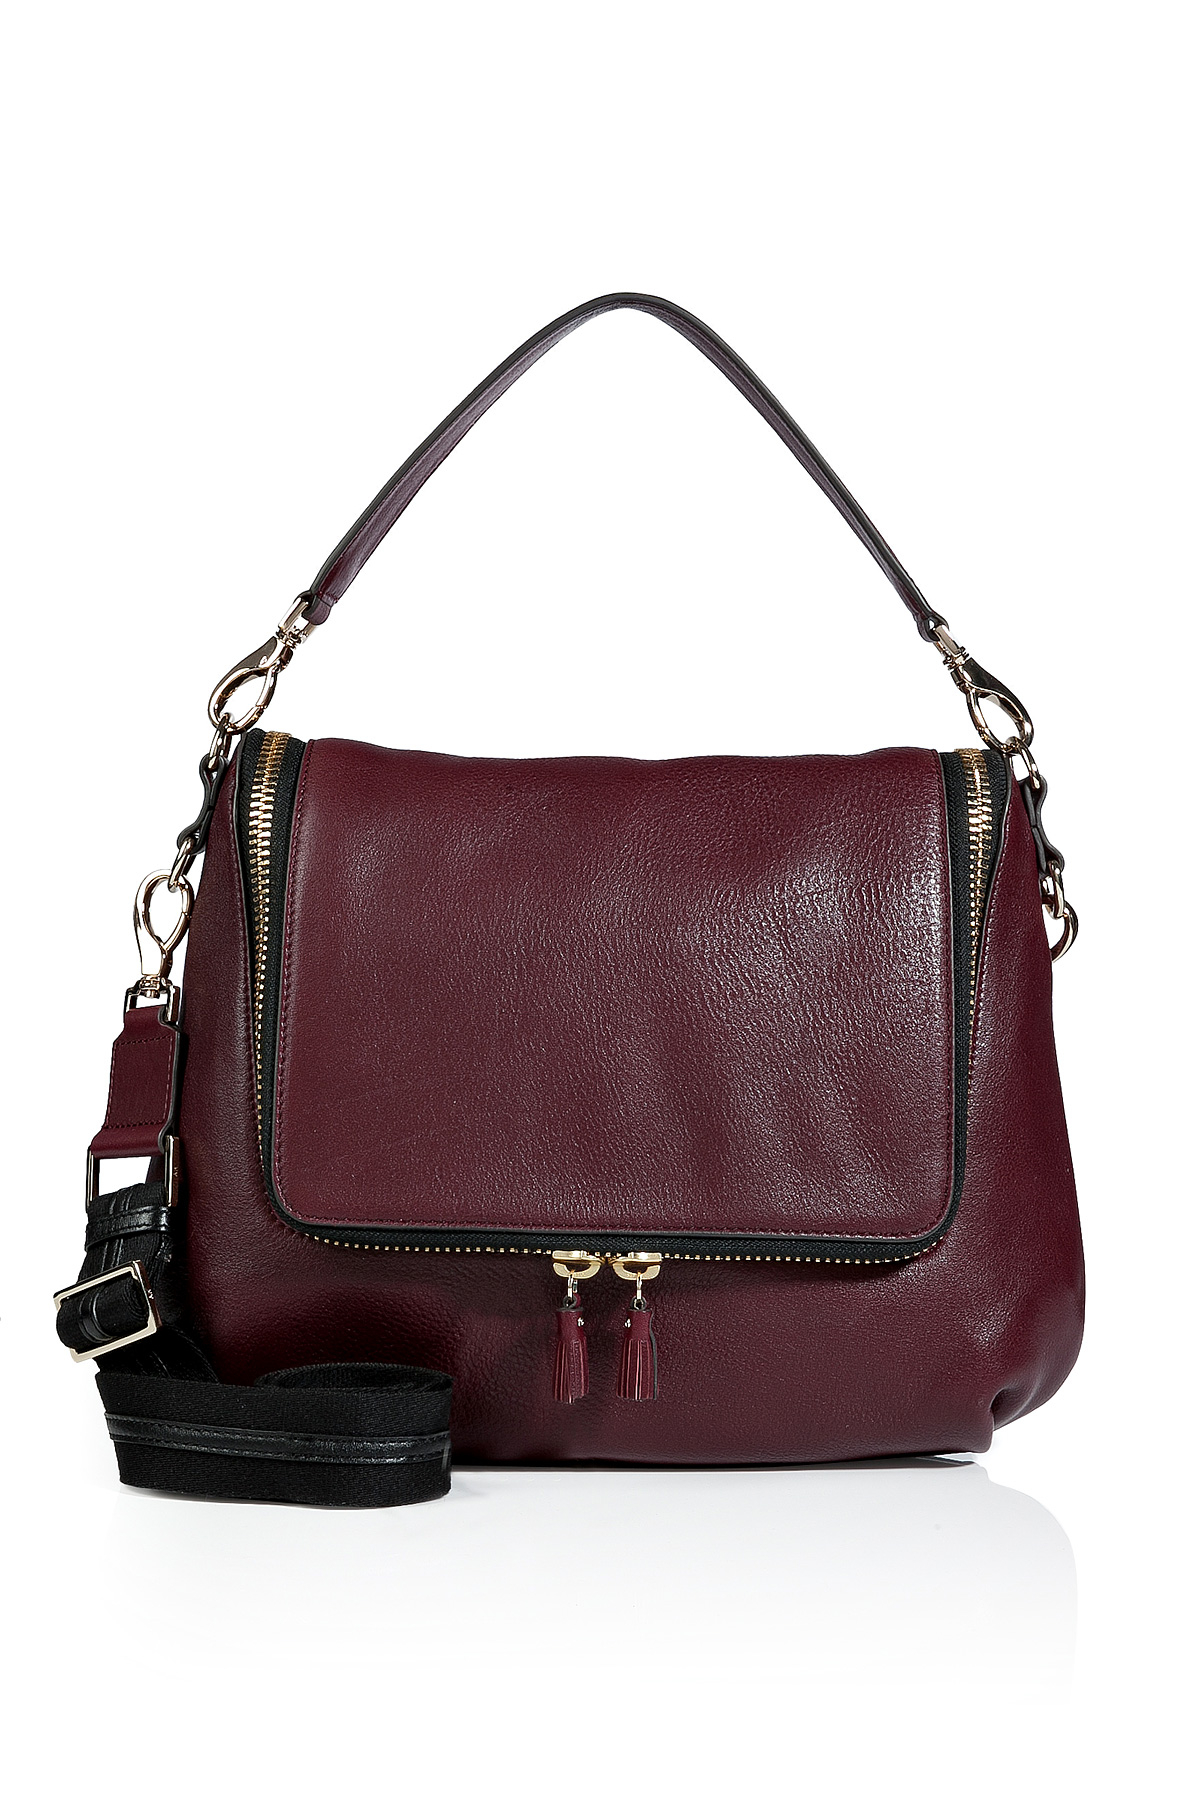 Anya Hindmarch Leather Maxi Zip Satchel in High Shine in Purple | Lyst